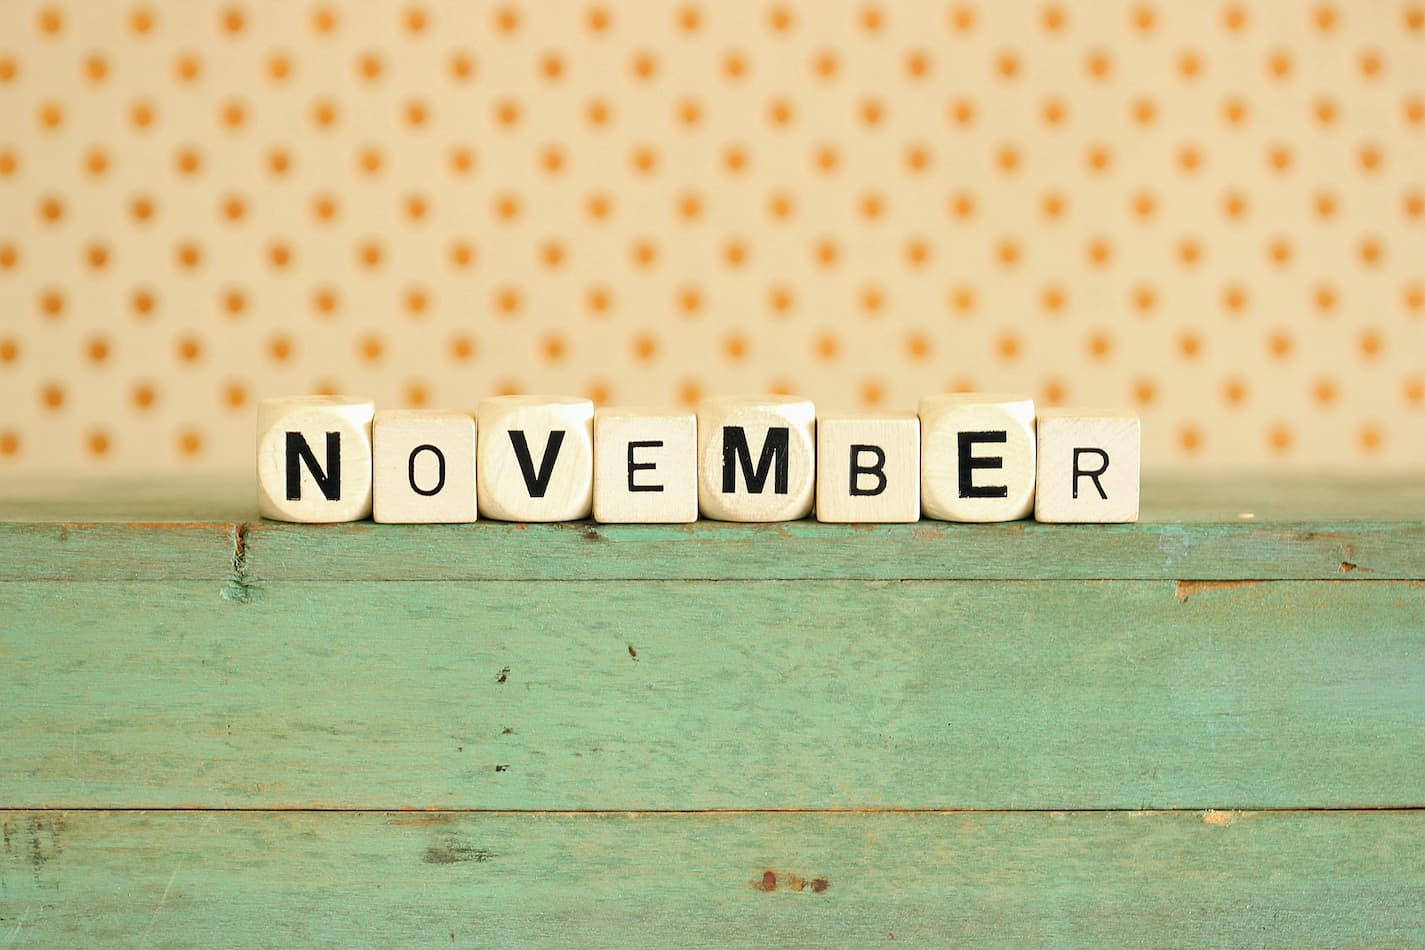 Image of word November on a fun green table with polka dot background.